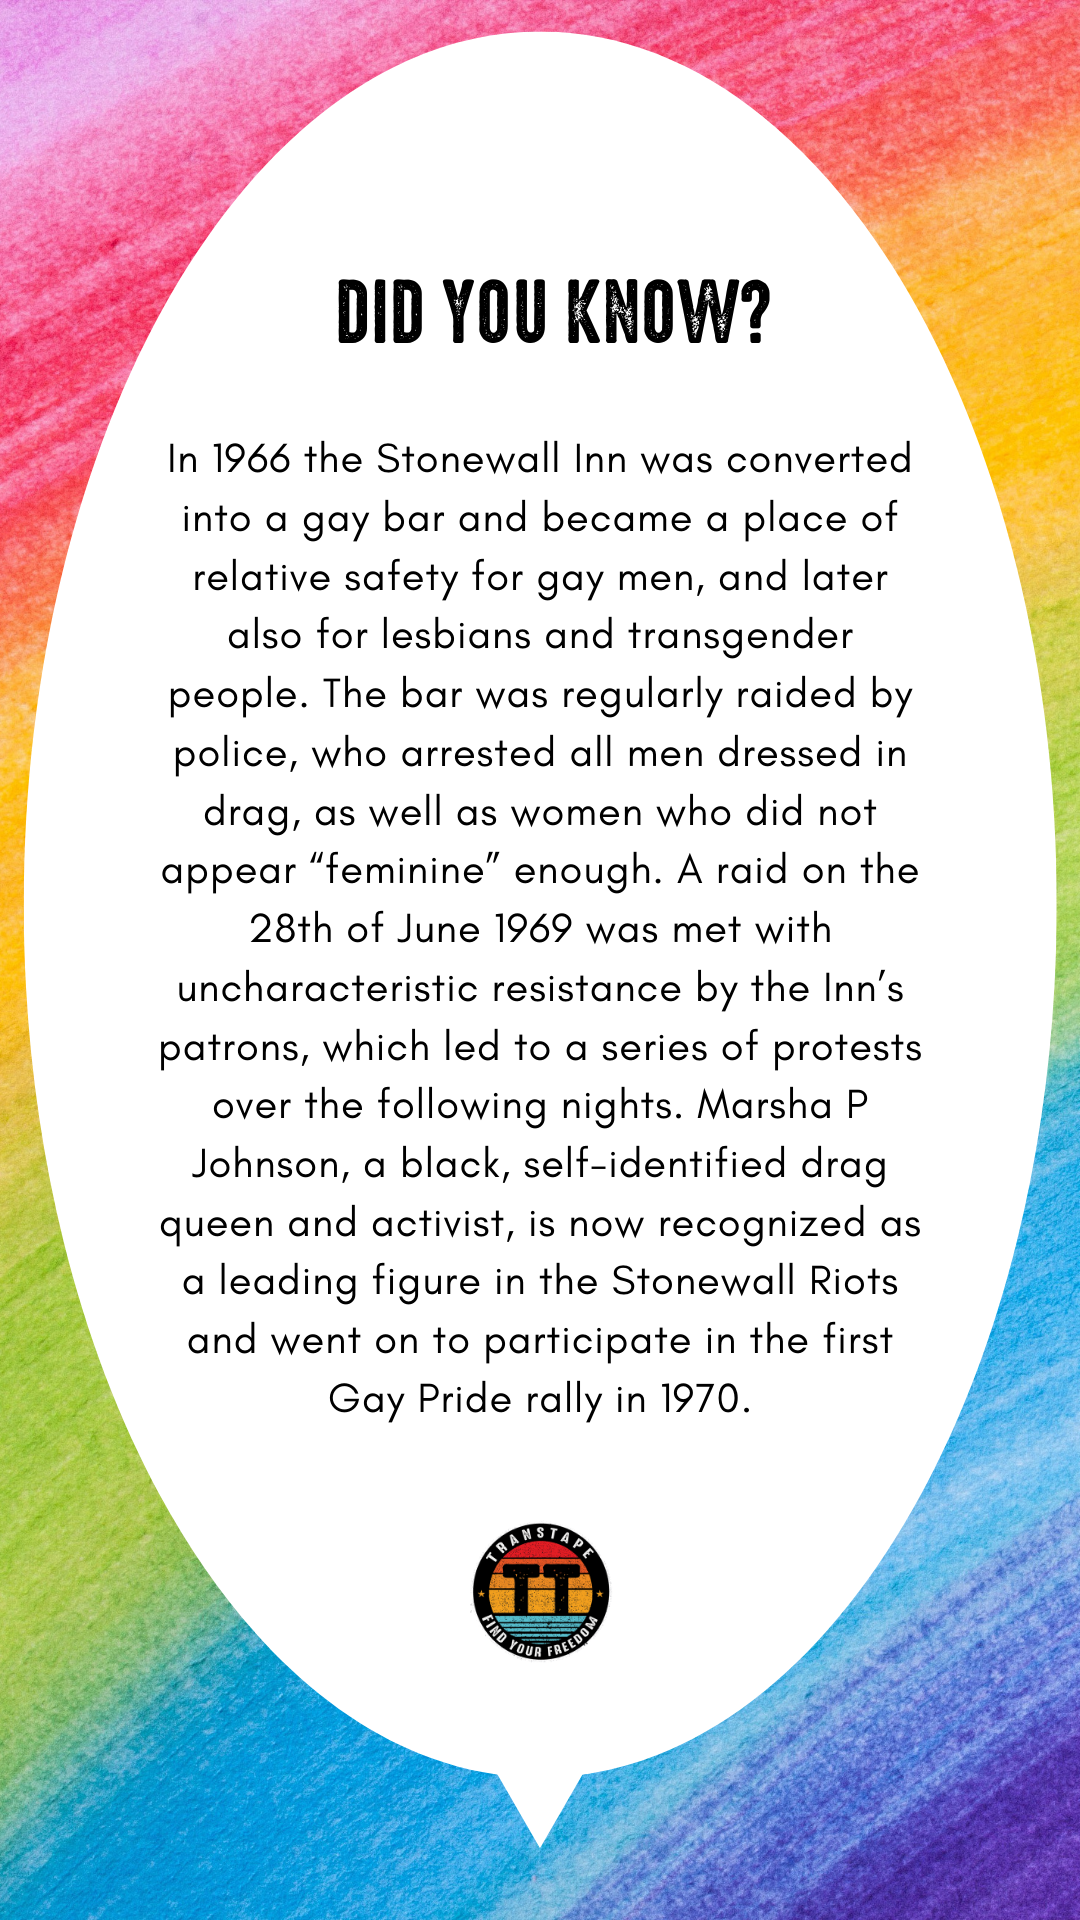 DID YOU KNOW? In 1966 the Stonewall Inn was converted into a gay bar and became a place of relative safety for gay men, and later also for lesbians and transgender people. The bar was regularly raided by police, who arrested all men dressed in drag, as well as women who did not appear feminine enough. A raid on the 28th of June 1969 was met with uncharacteristic resistance by the Inns patrons, which led to a series of protests over the following nights. Marsha P Johnson, a black, self-identified drag queen and activist, is now recognized as a leading figure in the Stonewall Riots and went on to participate in the first Gay Pride rally in 1970. 